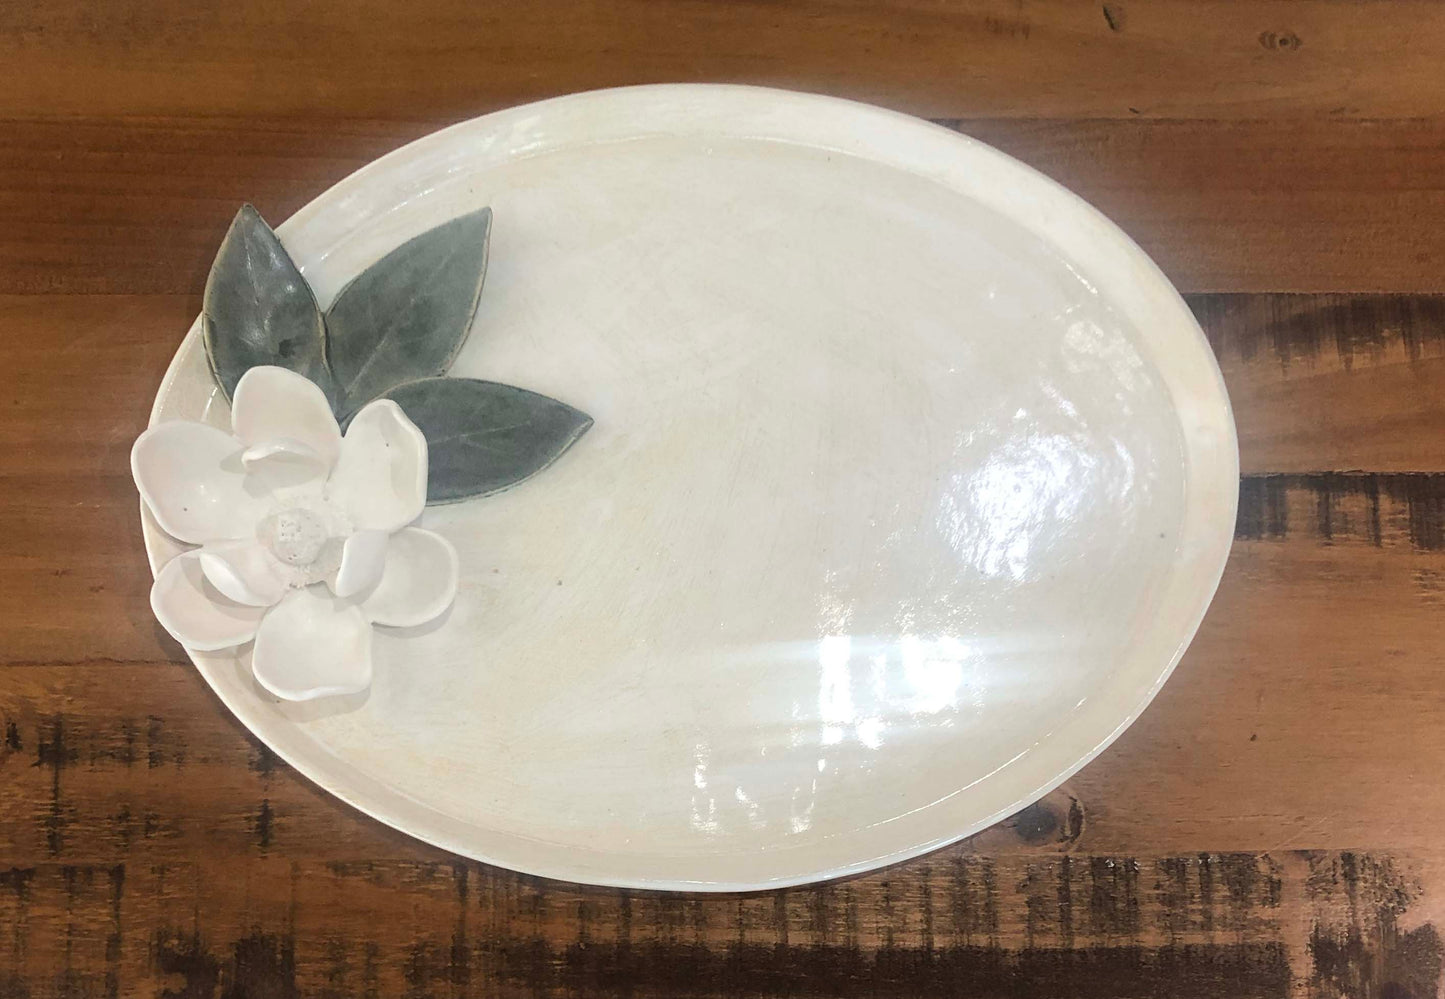 A In Full Bloom Series - Magnolia Oval Platter - Large